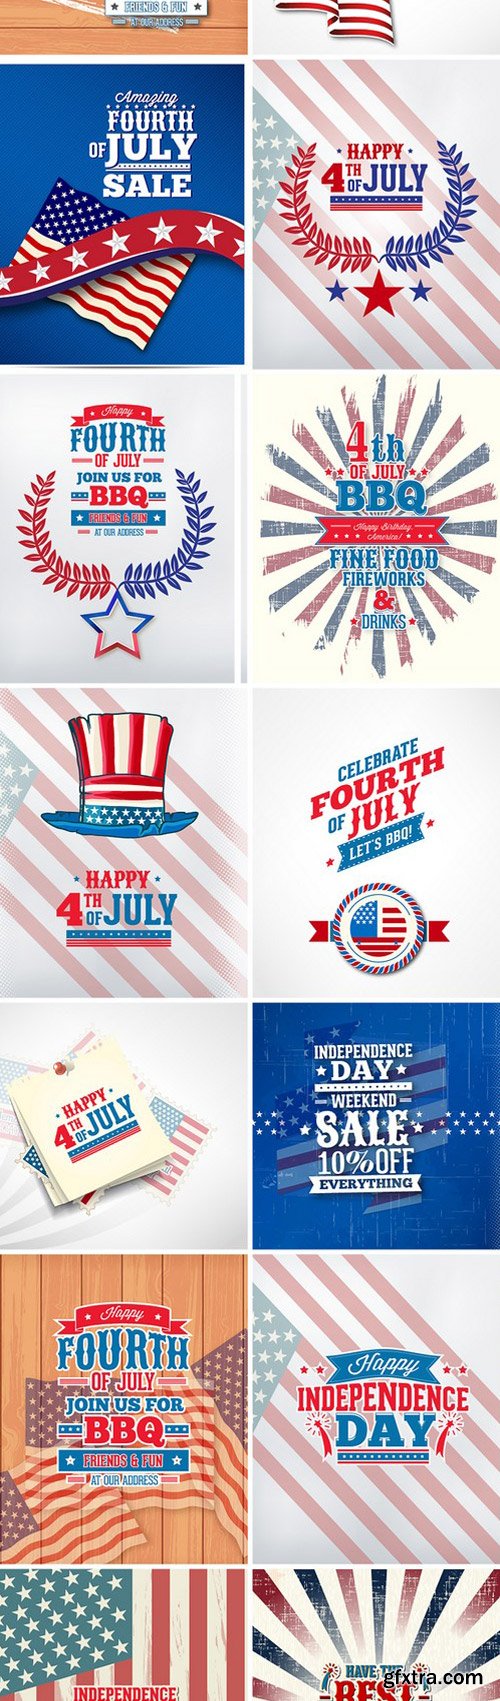 Independence Day Vector Illustrations